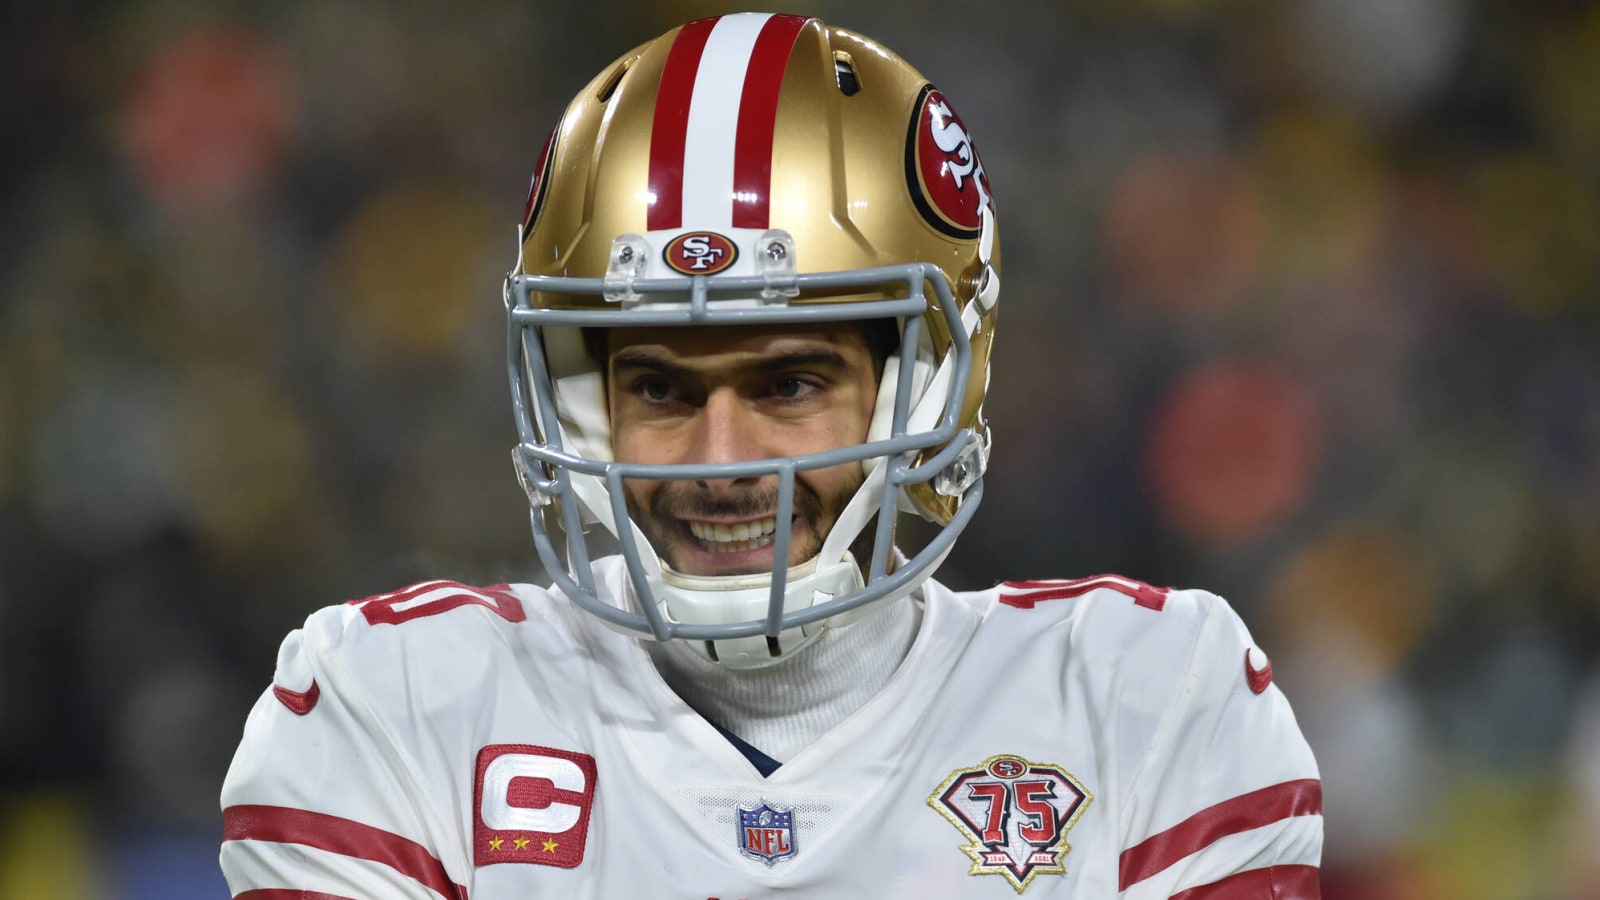 NFL insider expects 49ers to ‘re-engage’ Garoppolo in trade talks